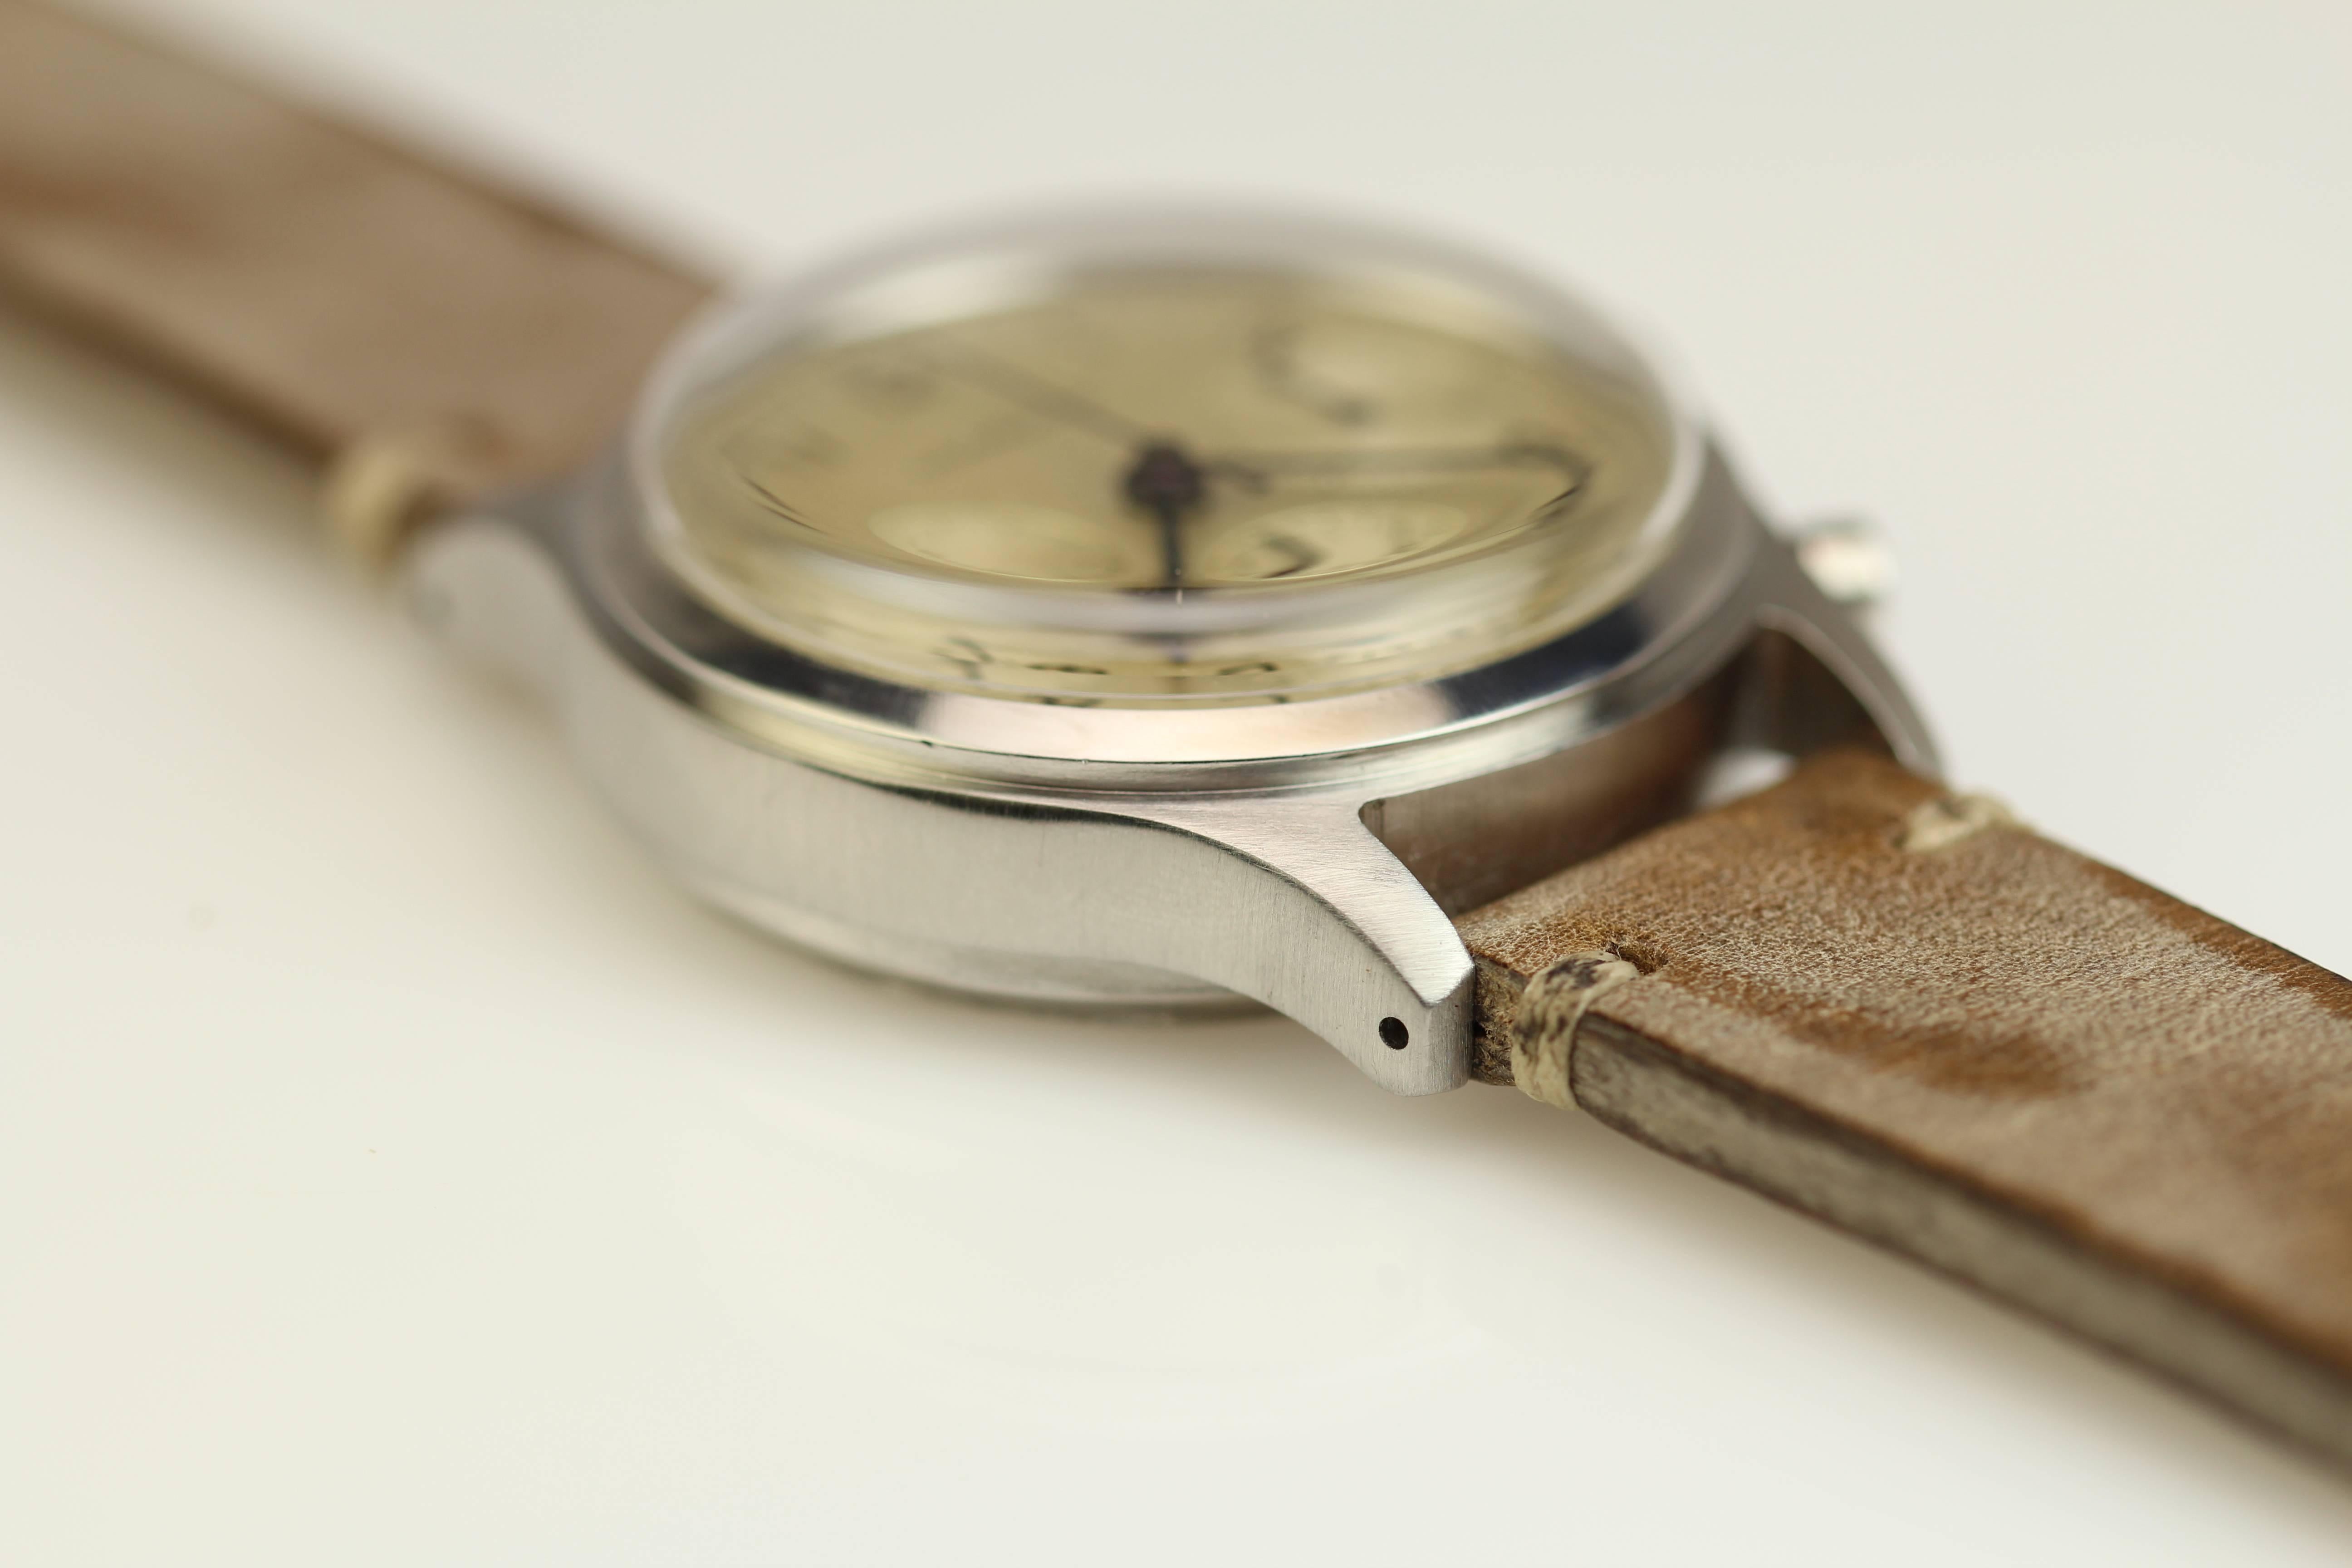 The is a nice thick case Wittnauer chronograph with a caliber 22 manual wind movement. 